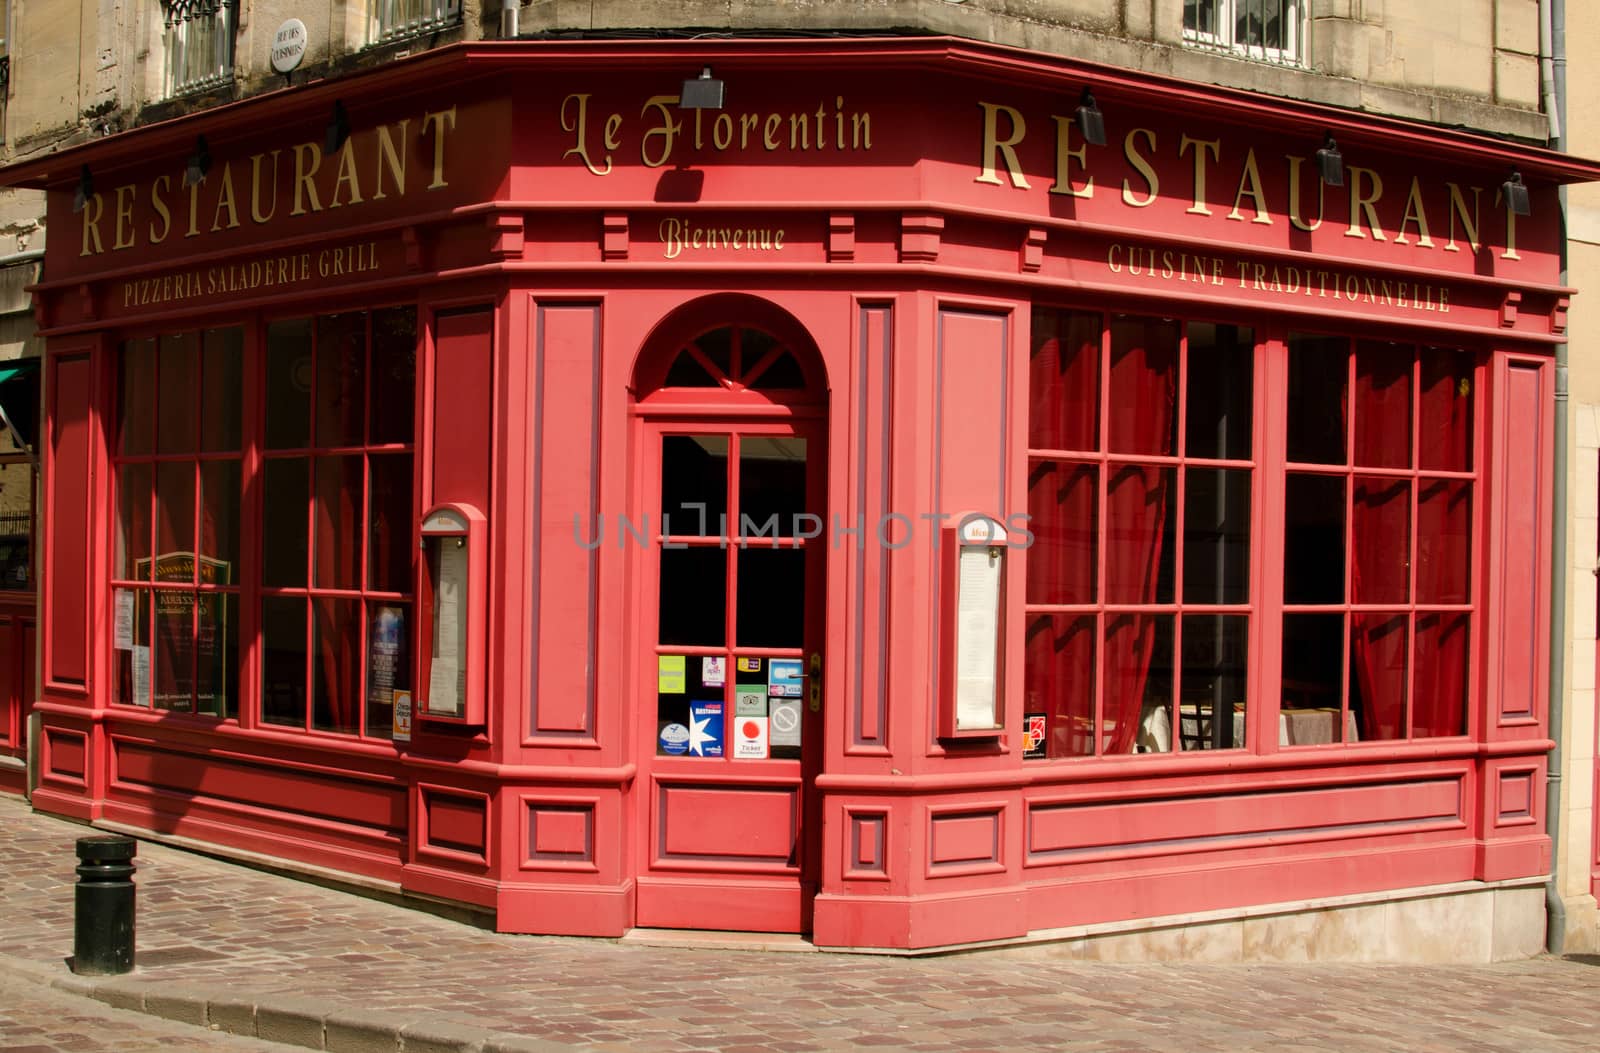 Restaurant, Bayeux, France by lauria